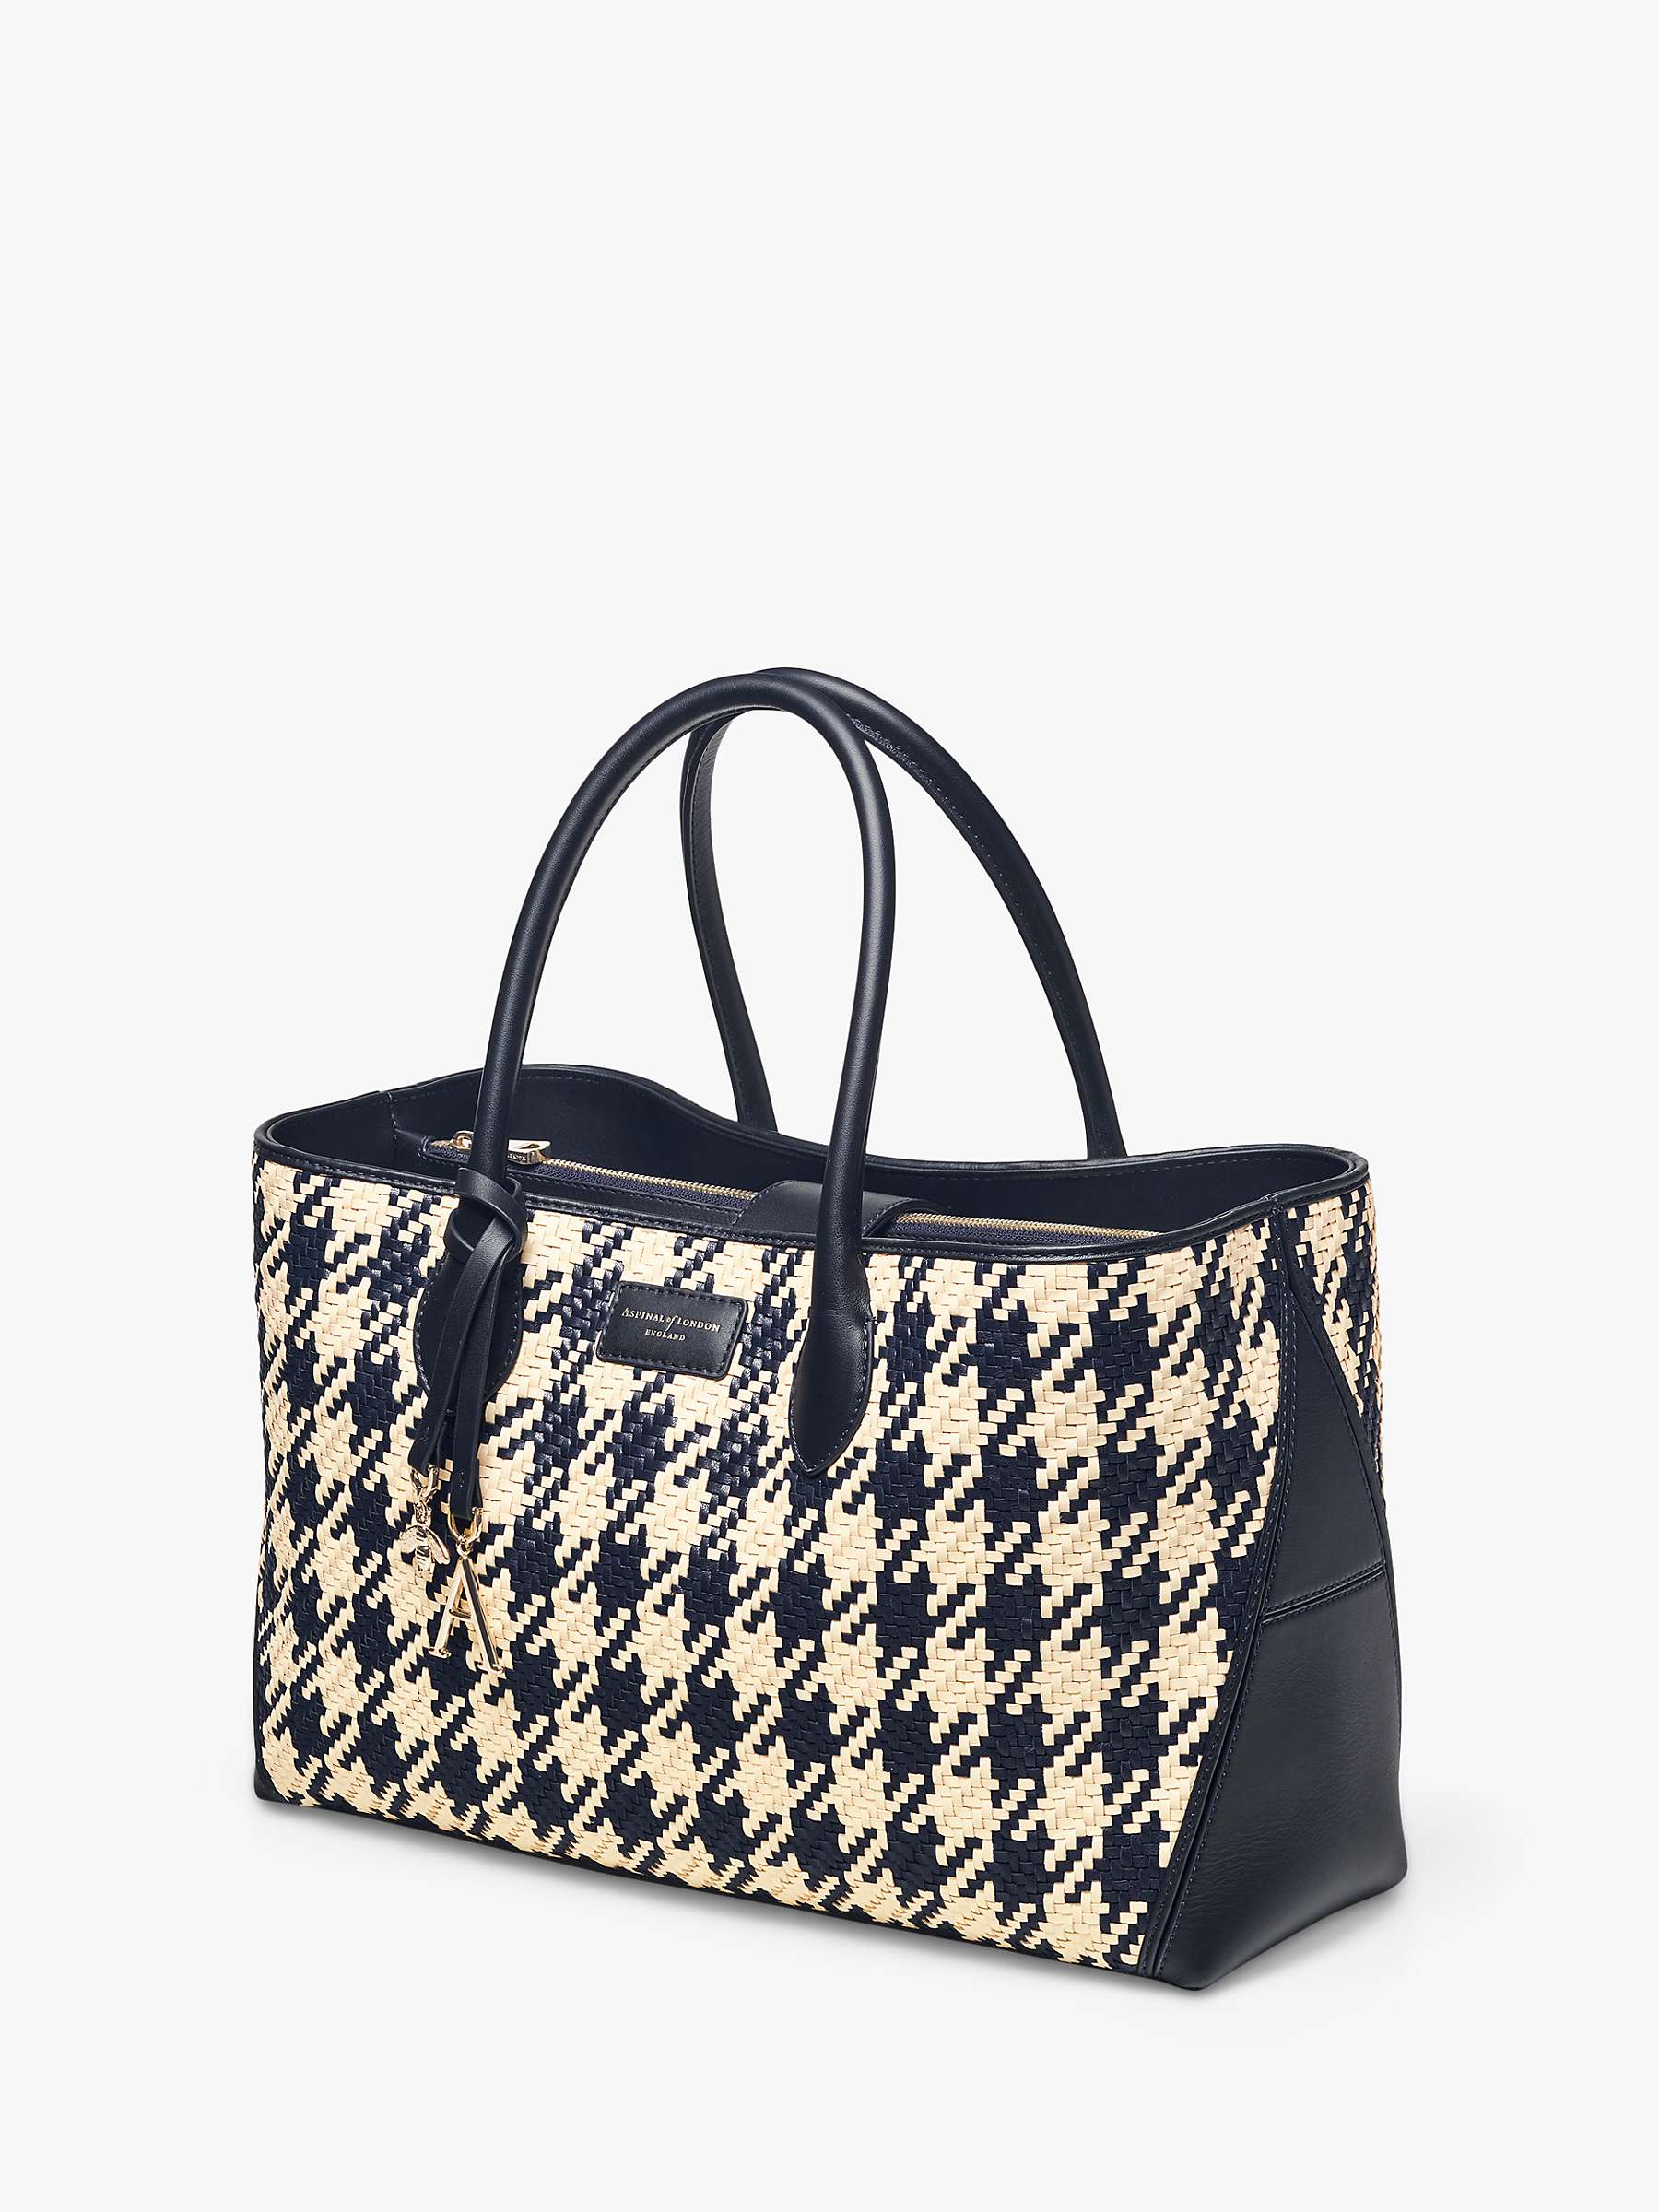 Buy Aspinal of London Dogtooth Weave Leather Tote Bag, Navy/Ivory Online at johnlewis.com